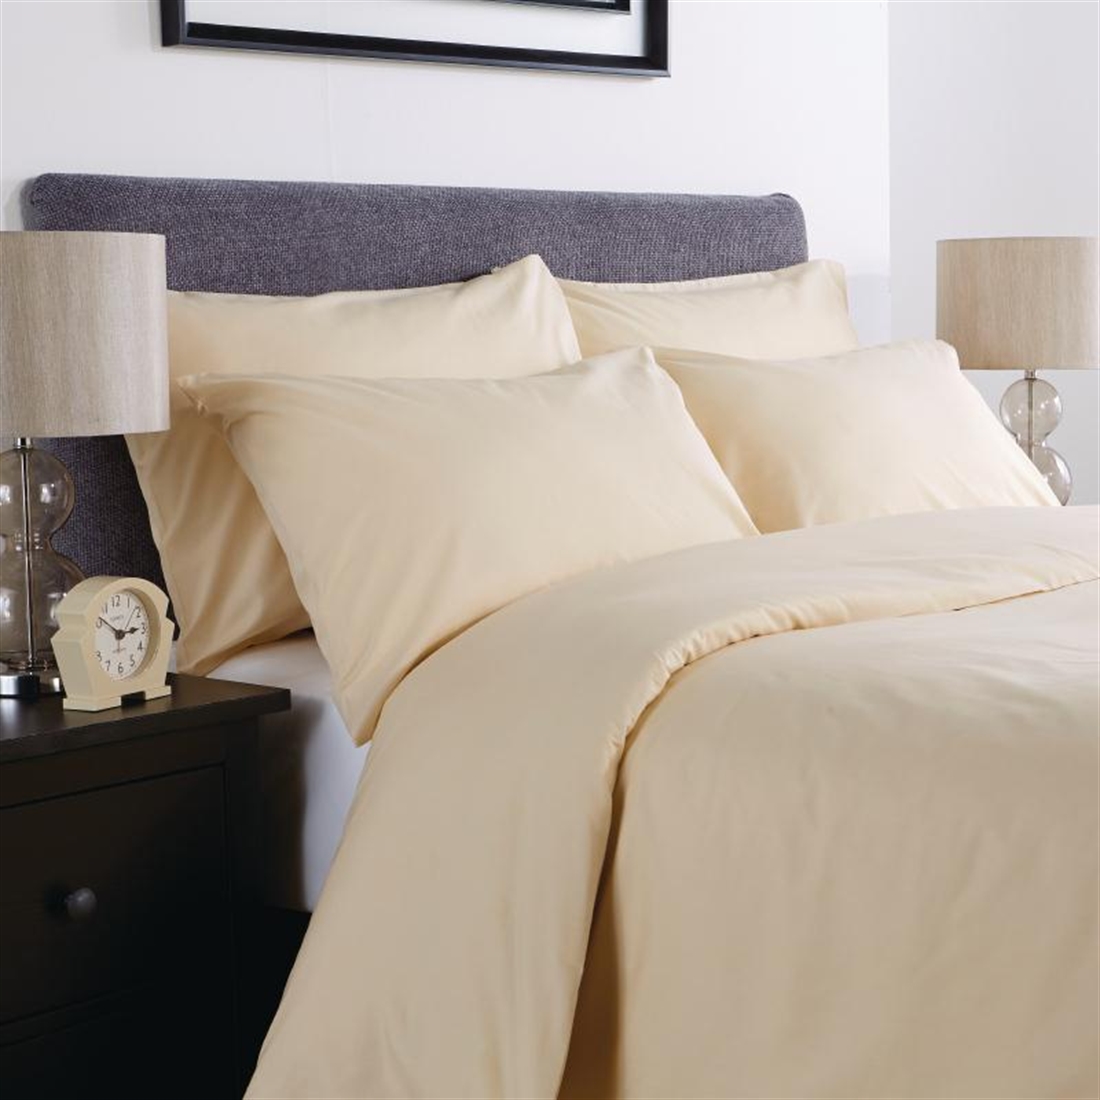 Mitre Comfort Percale Flat Sheet Oatmeal King Size